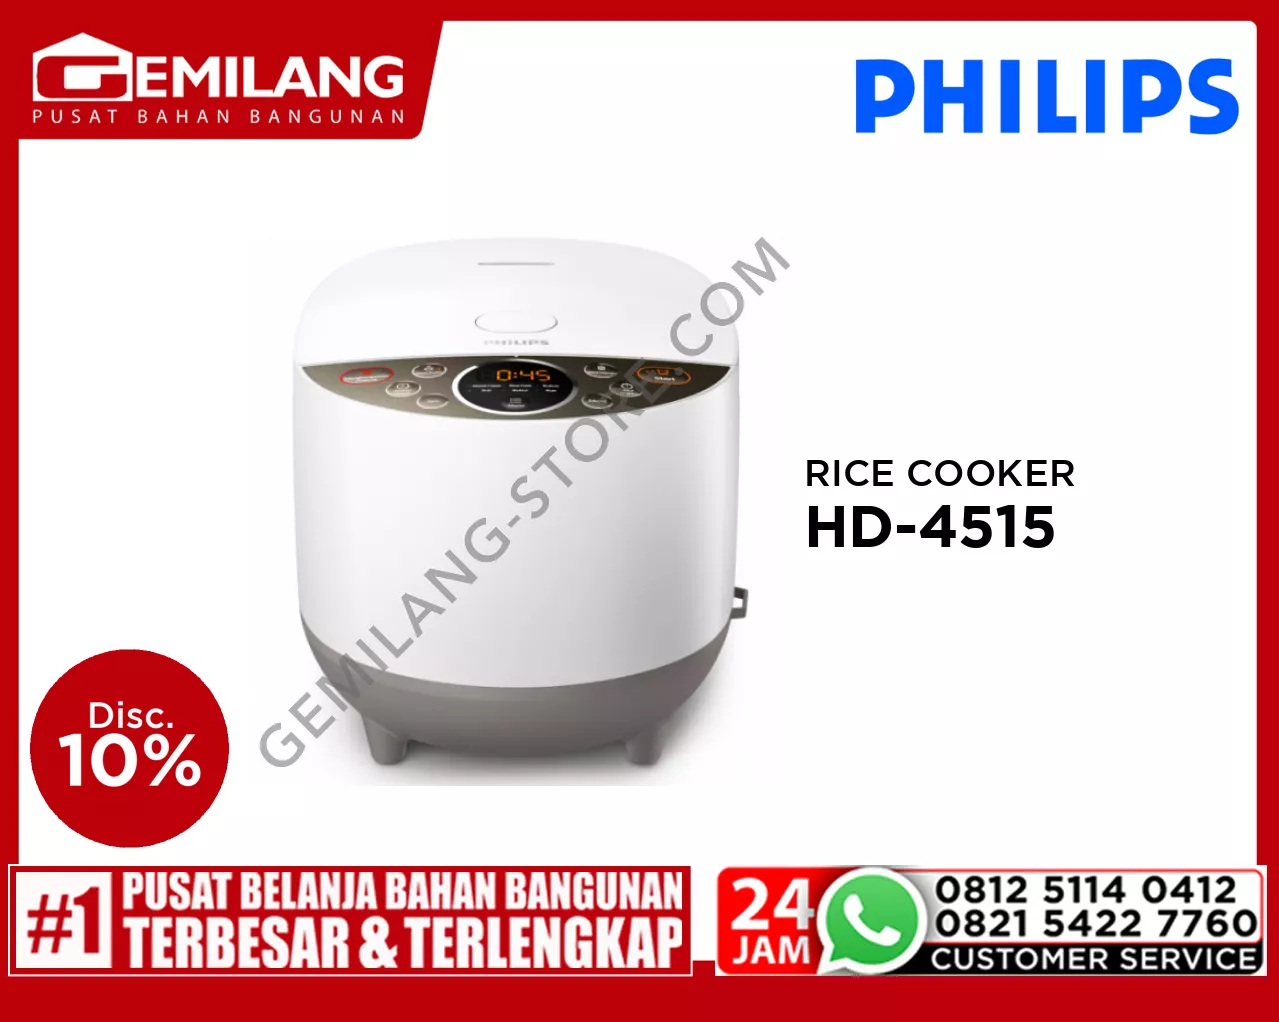 PHILIPS RICE COOKER HD-4515